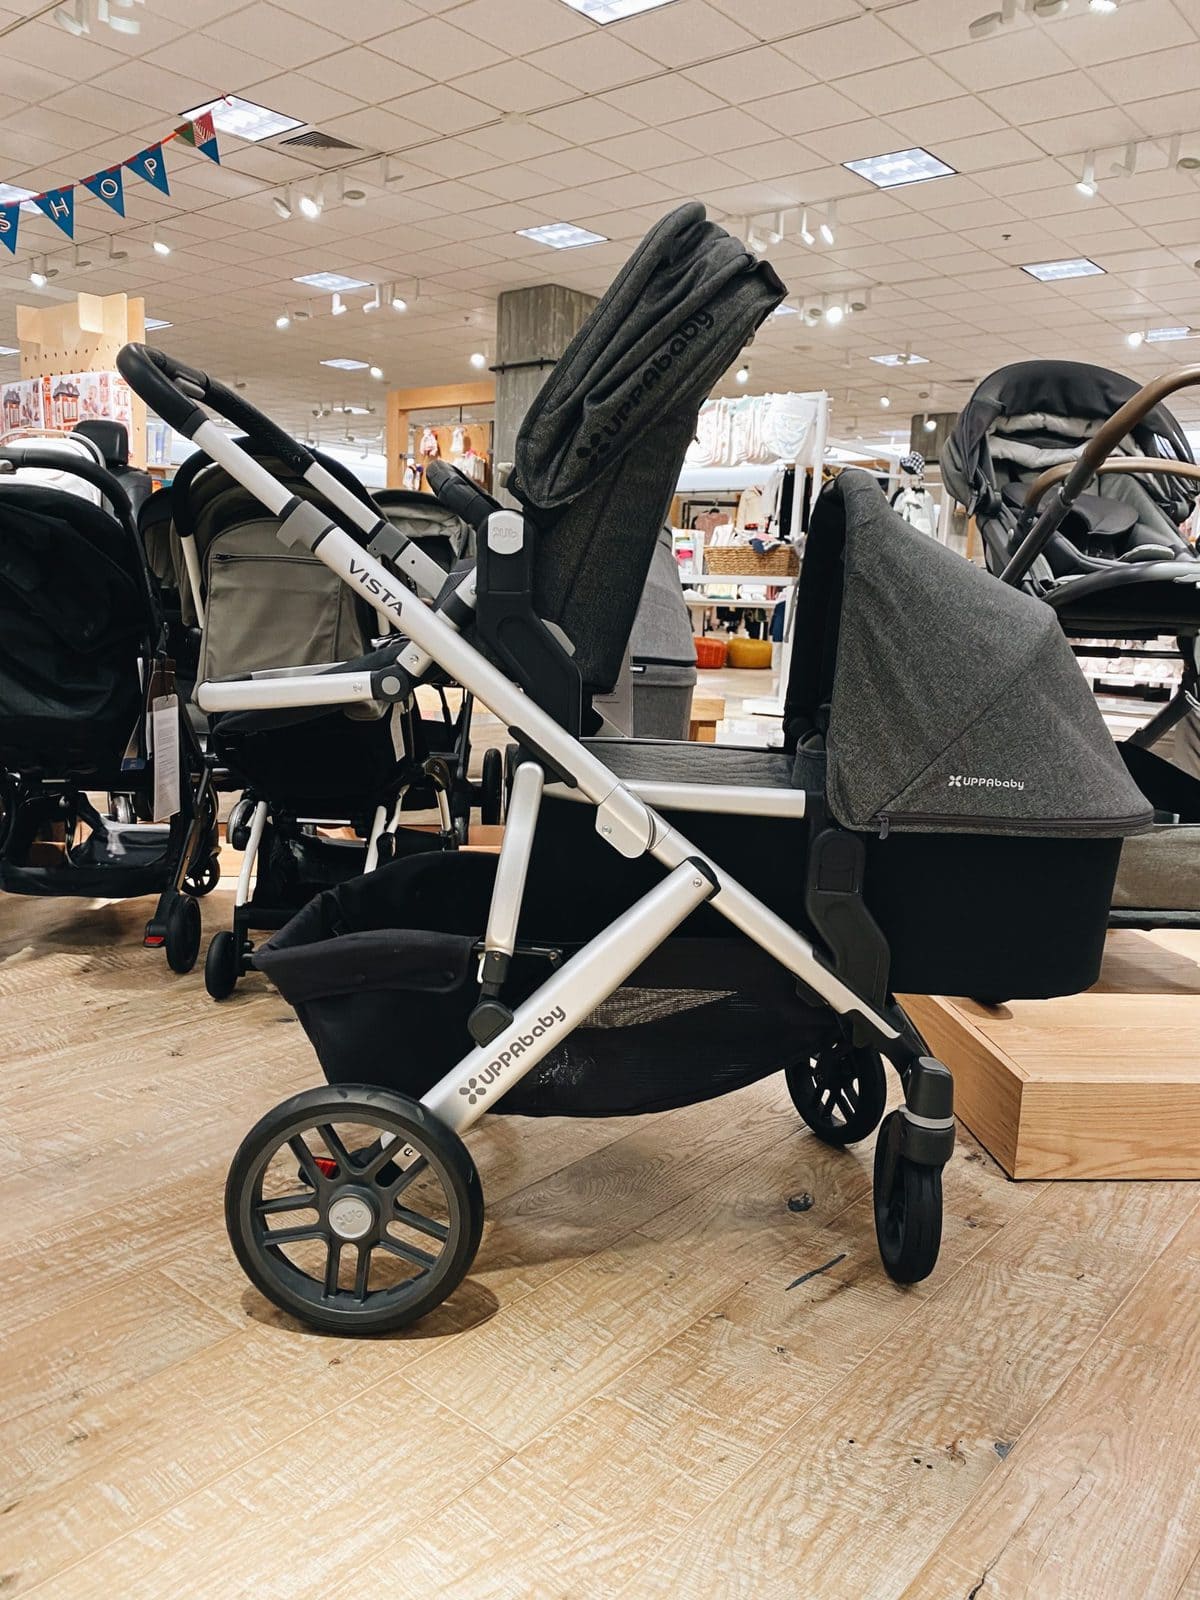 uppababy discount